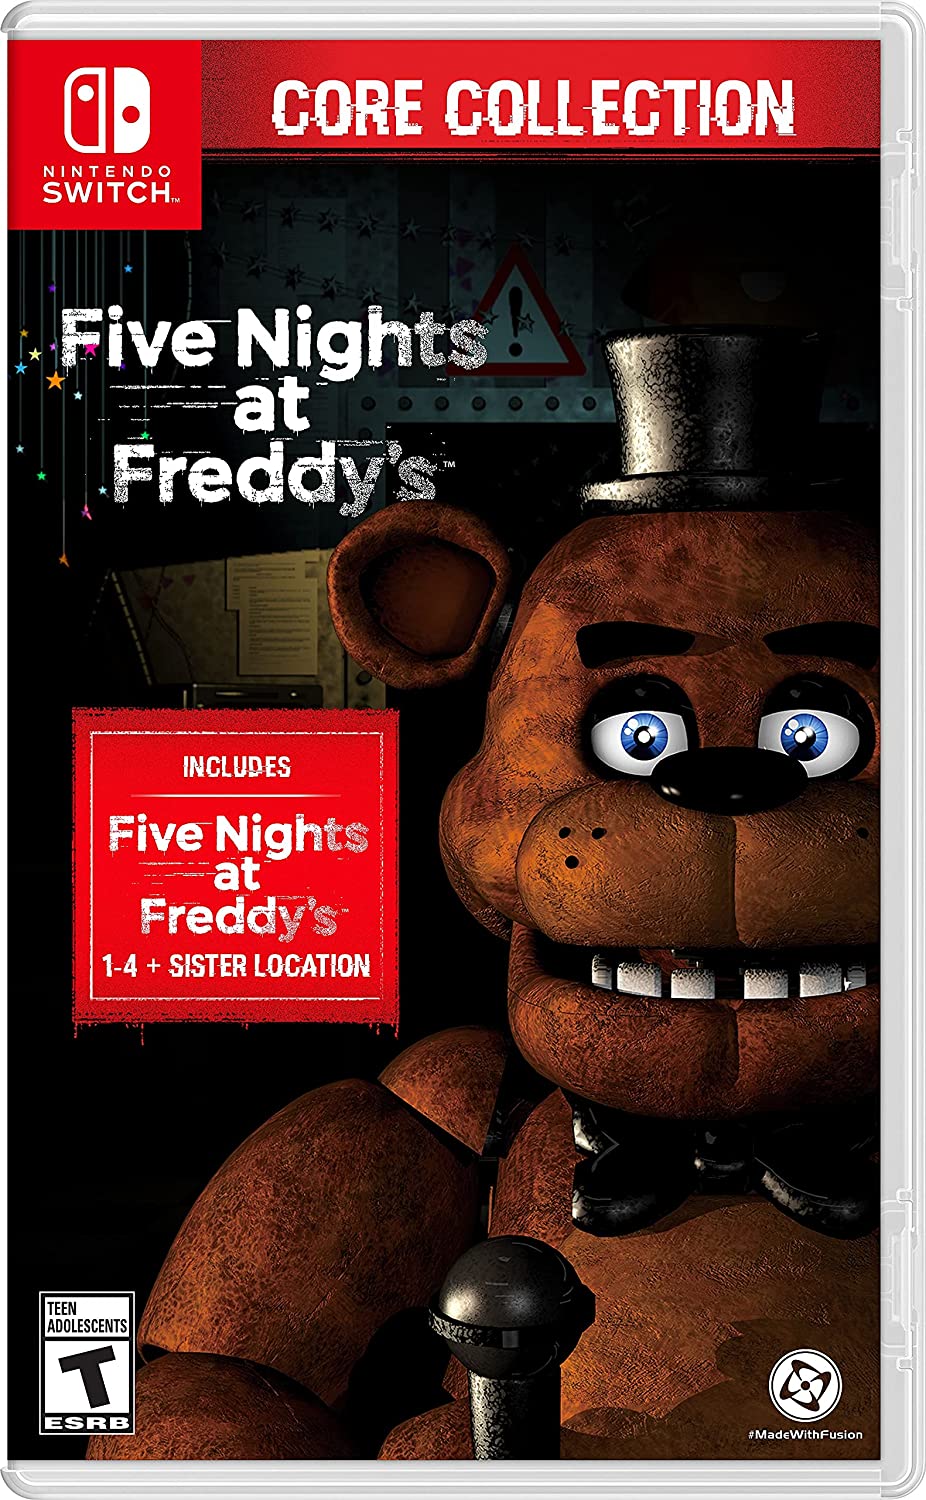 Five Nights at Freddy's: The Core Collection (Nintendo Switch) $20 + Free Shipping w/ Prime or on orders over $25